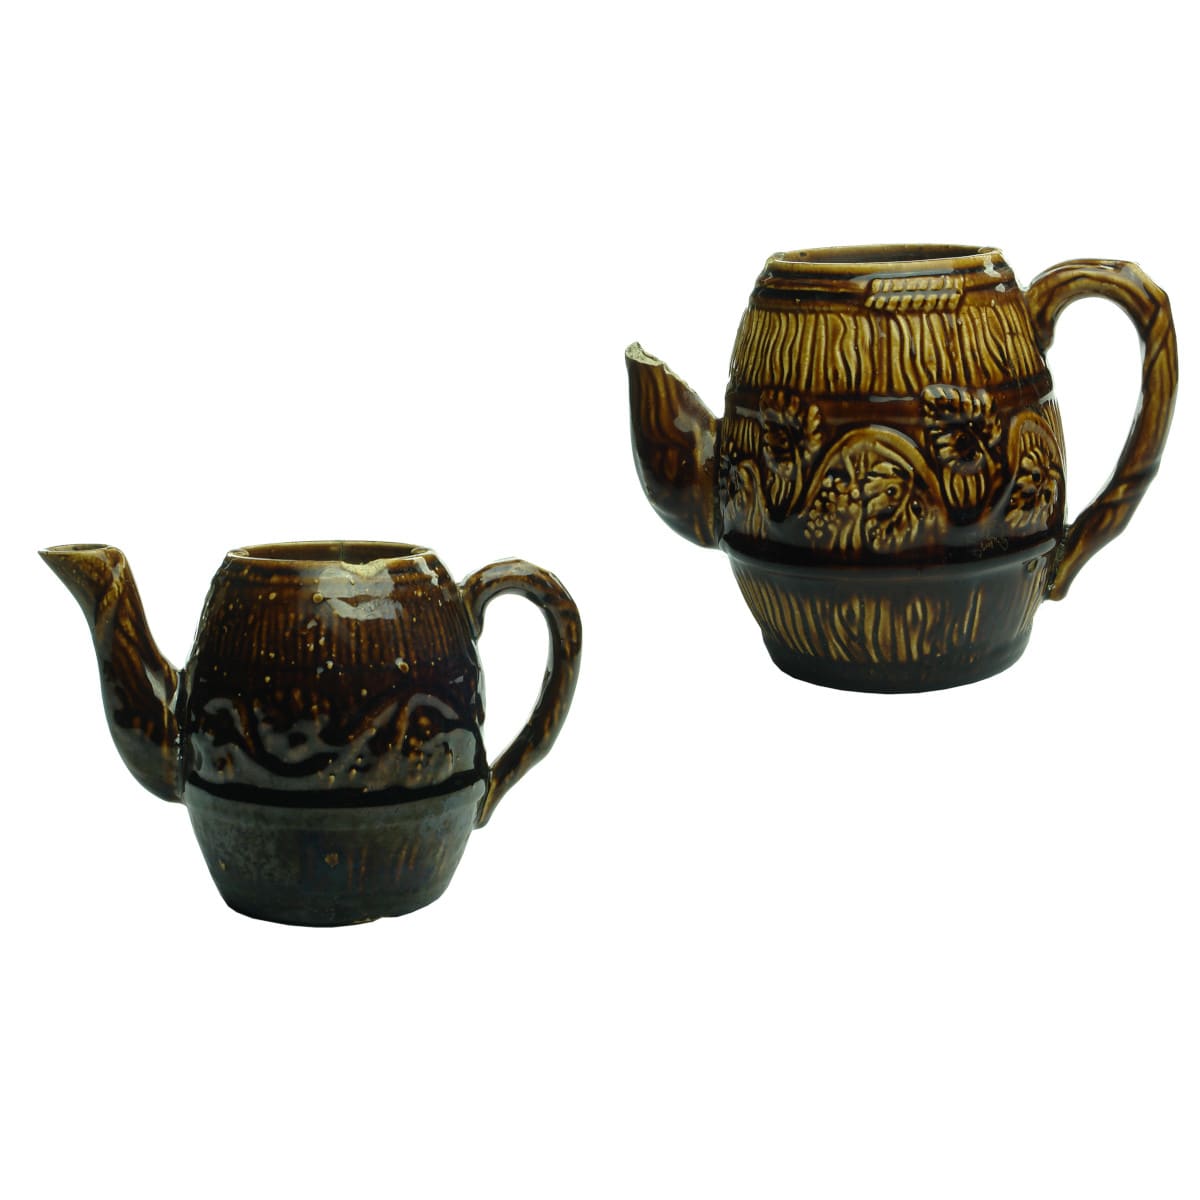 2 Teapots. Barrel shapes with Grapes & Vines around the middle. 1 Cup and 2 Cup sizes. Rockingham Glaze.